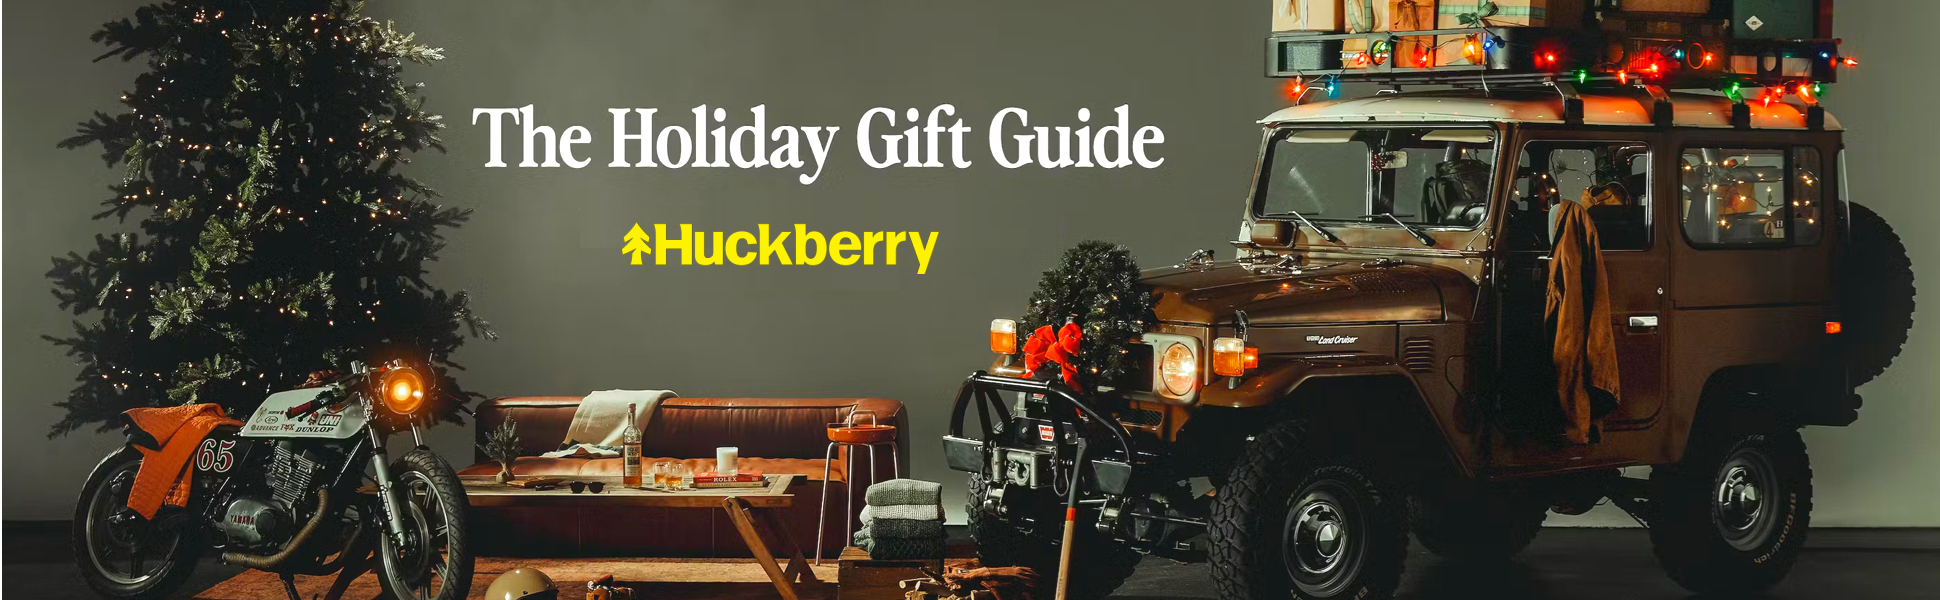 Huckberry Gift Guide Home - Image